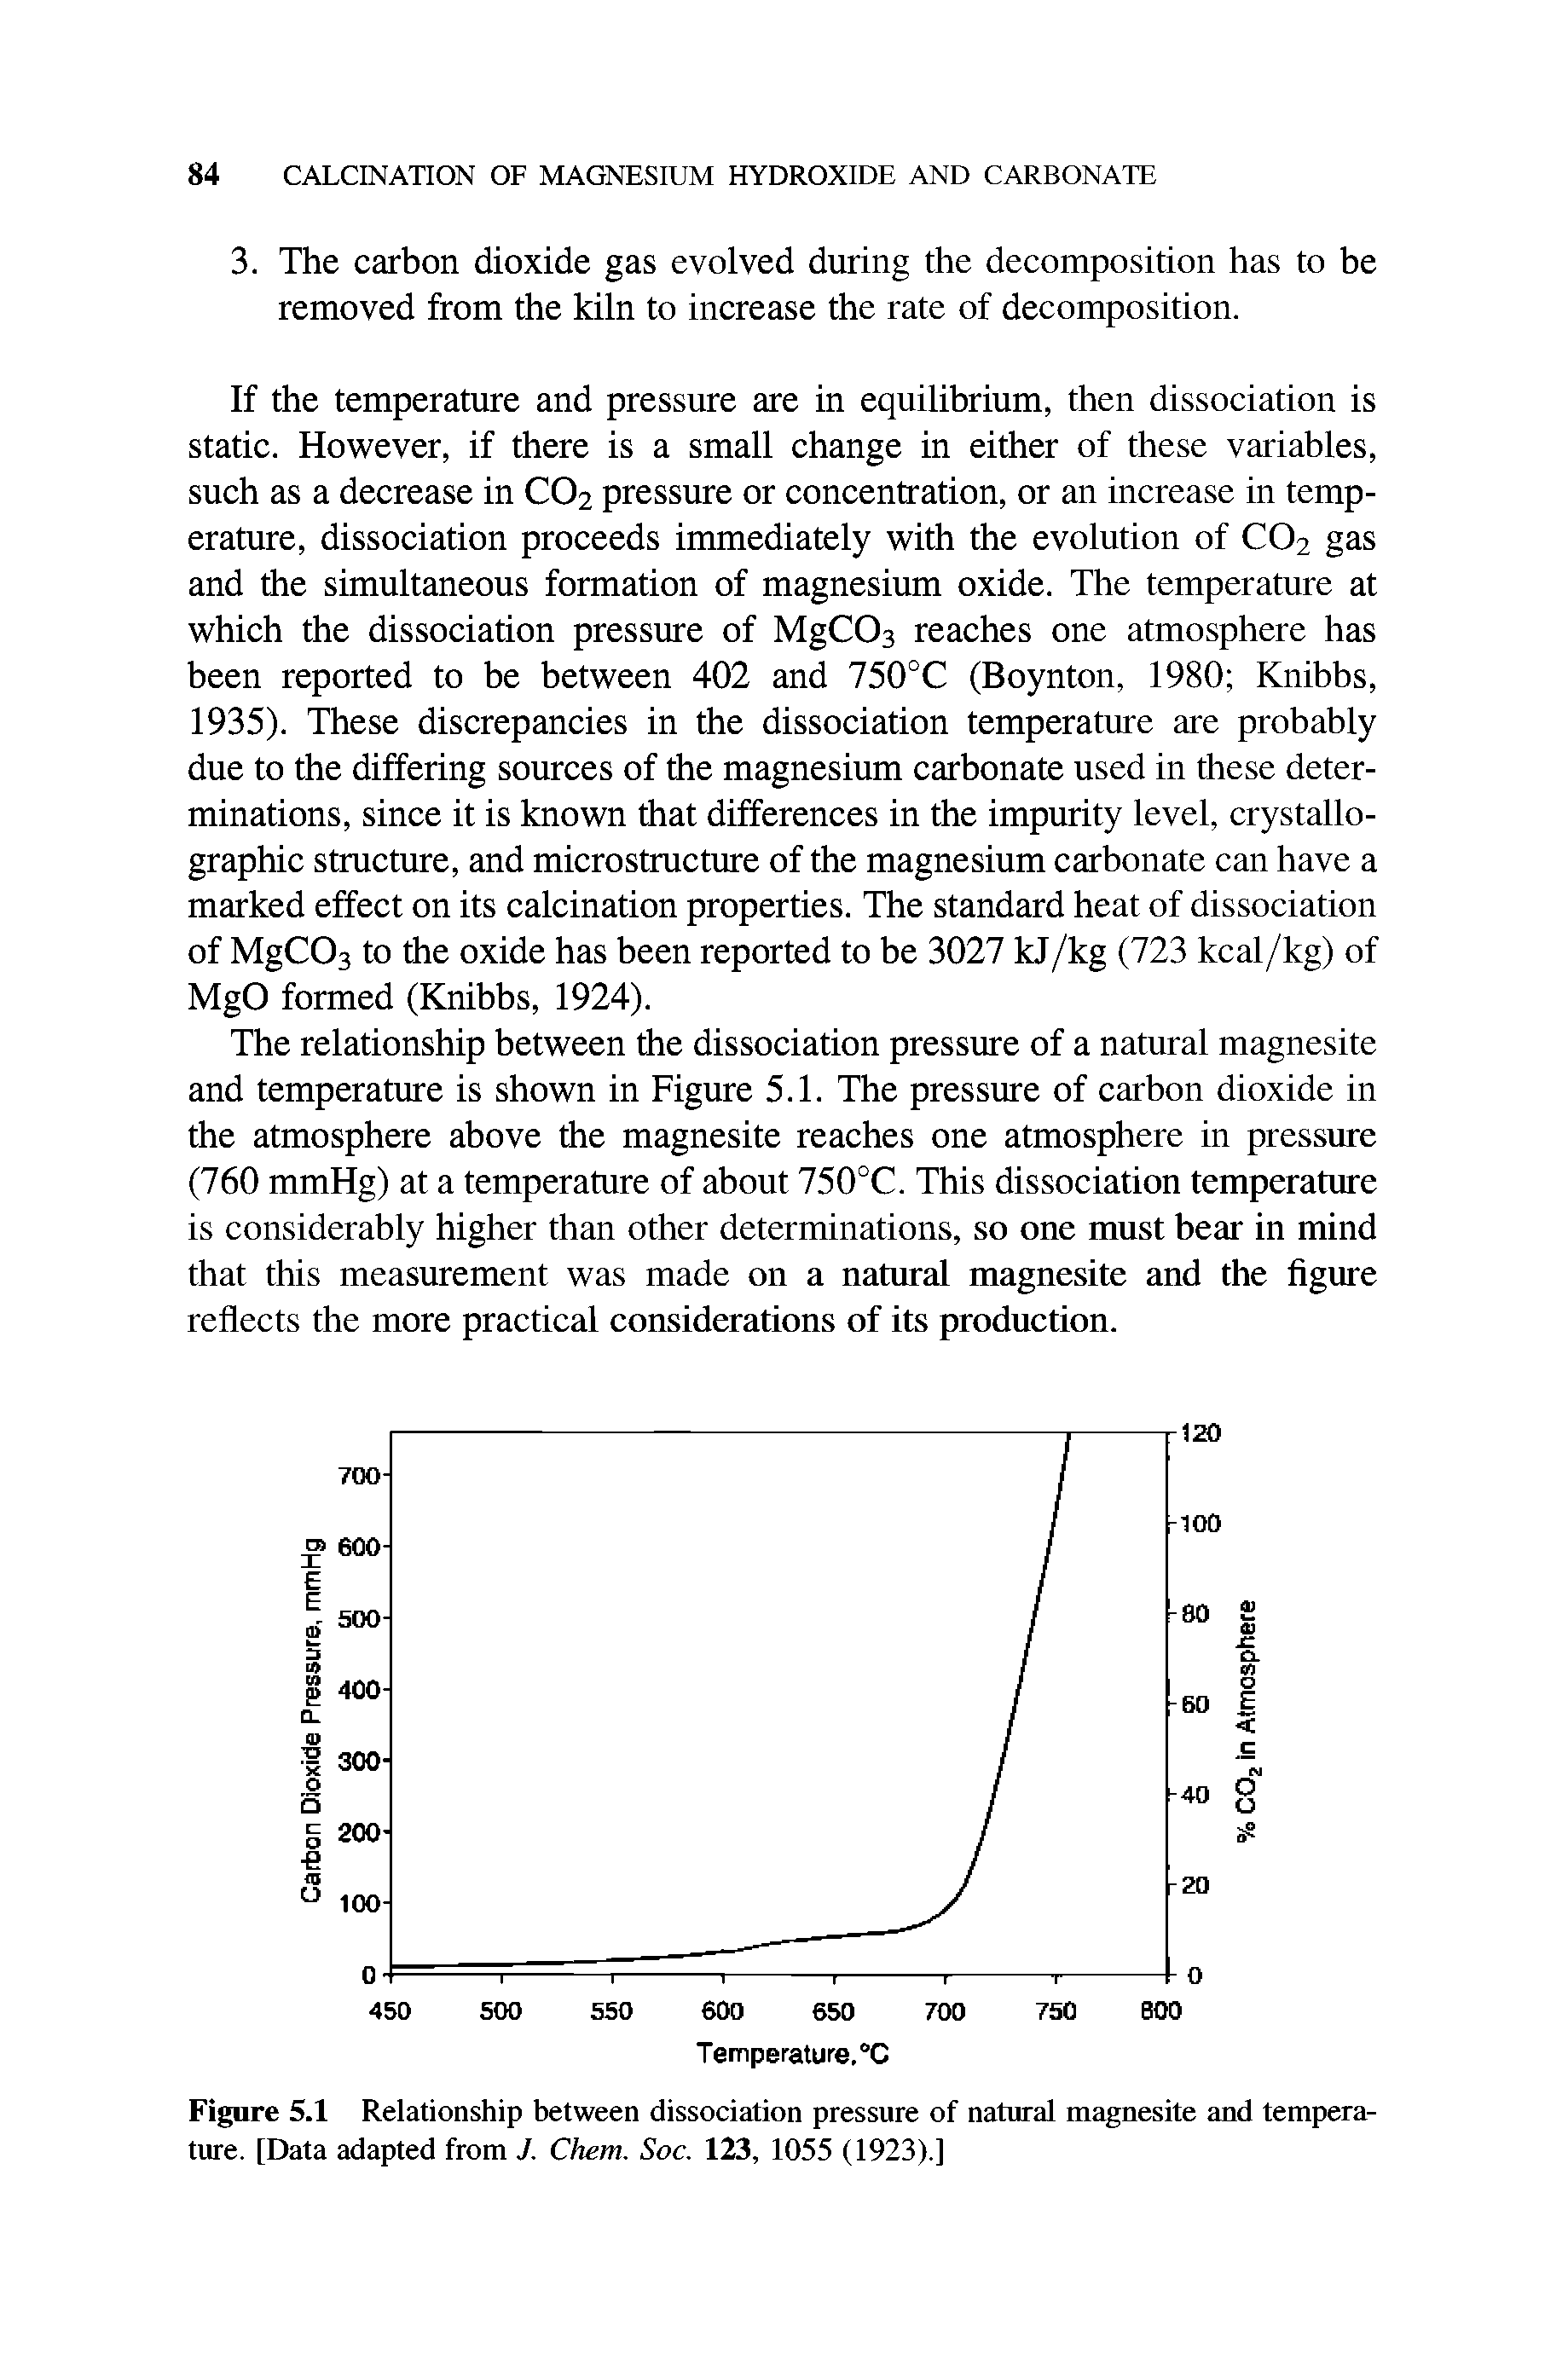 Figure 5.1 Relationship between dissociation pressure of natural magnesite and temperature. [Data adapted from J. Chem. Soc. 123, 1055 (1923).]...